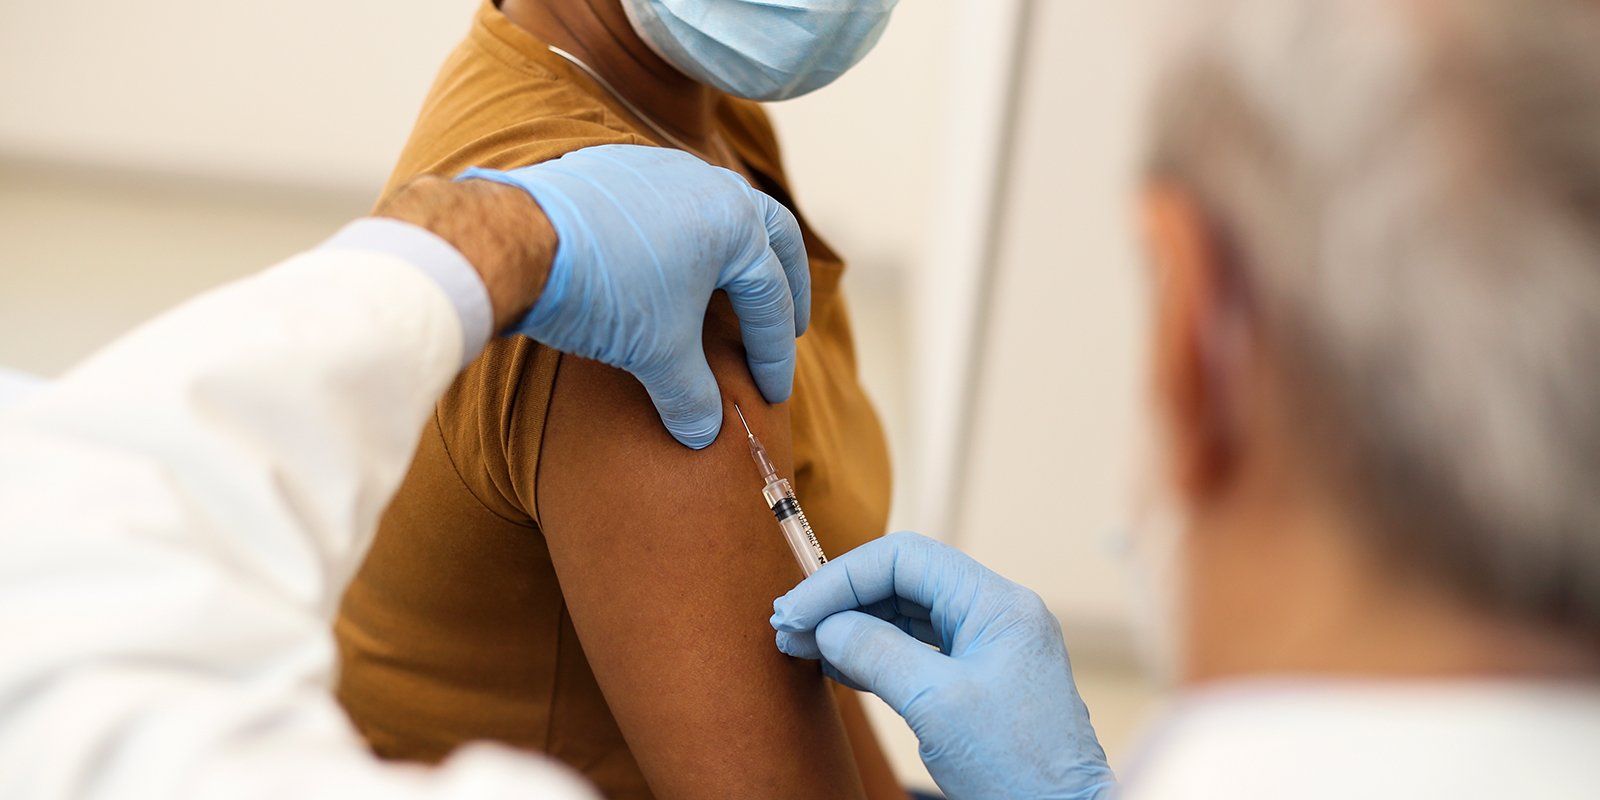 AFSCME members lead the way in getting vaccinated